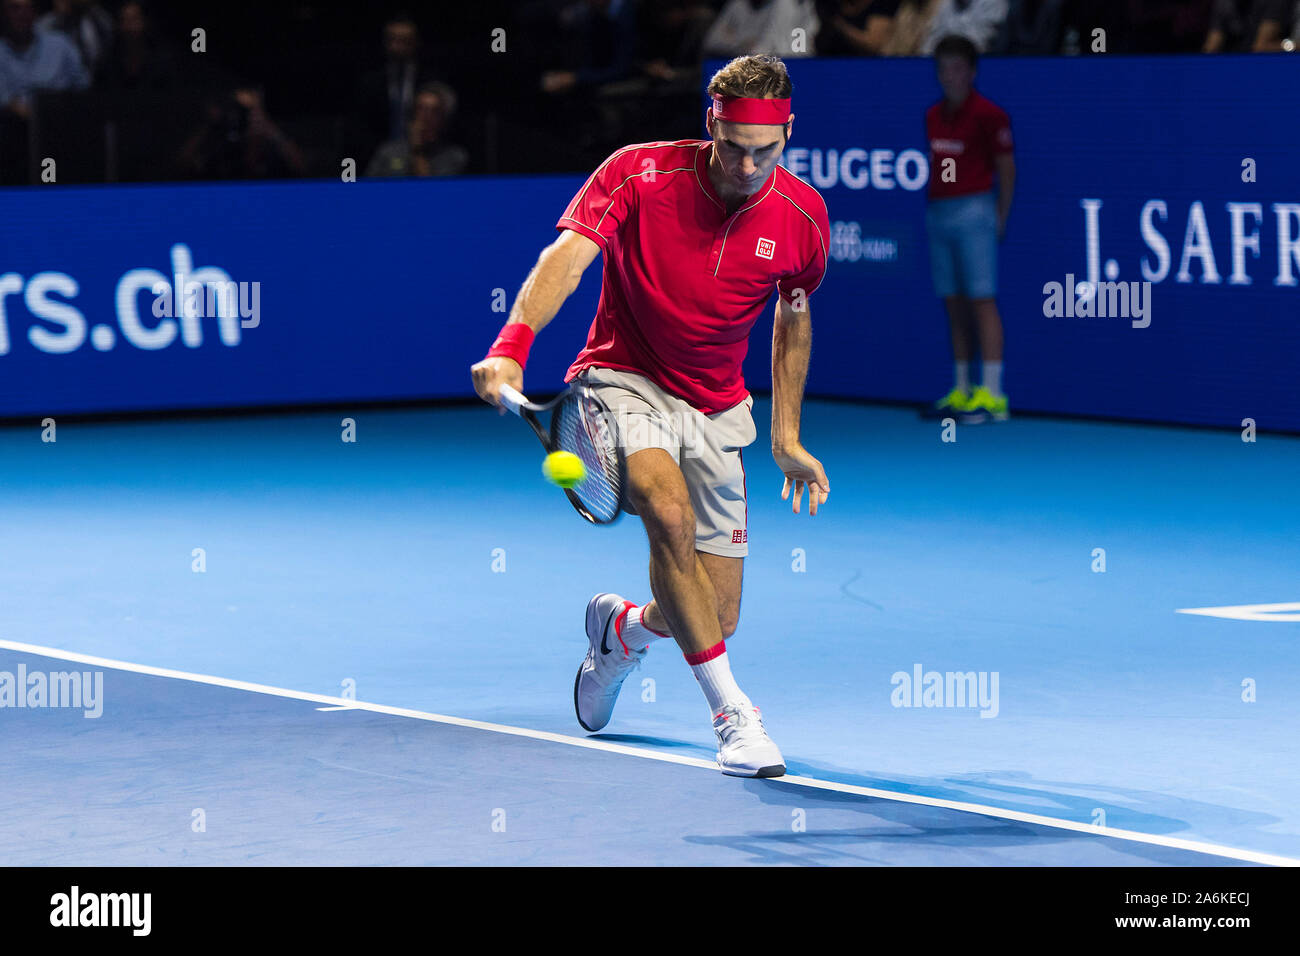 St. Jakobshalle, Basel, Switzerland. 27th Oct, 2019. ATP World Tour Tennis,  Swiss Indoors Final; Roger Federer (SUI) hits a forehand in the match  against Alex de Minaur (AUS) - Editorial Use Credit: